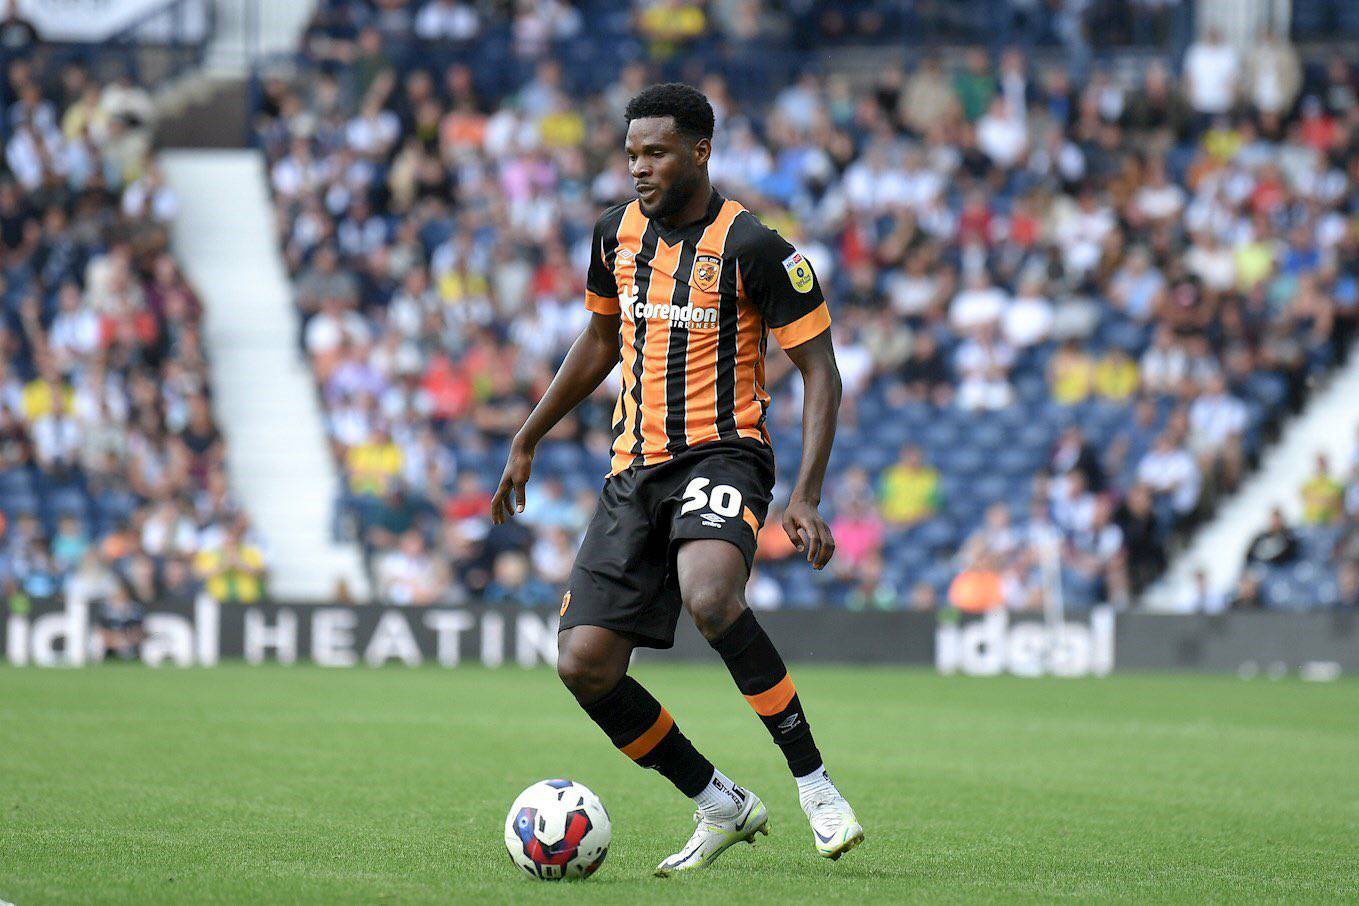 Benjamin Tetteh provides assist on return from suspension as Hull lose at Norwich